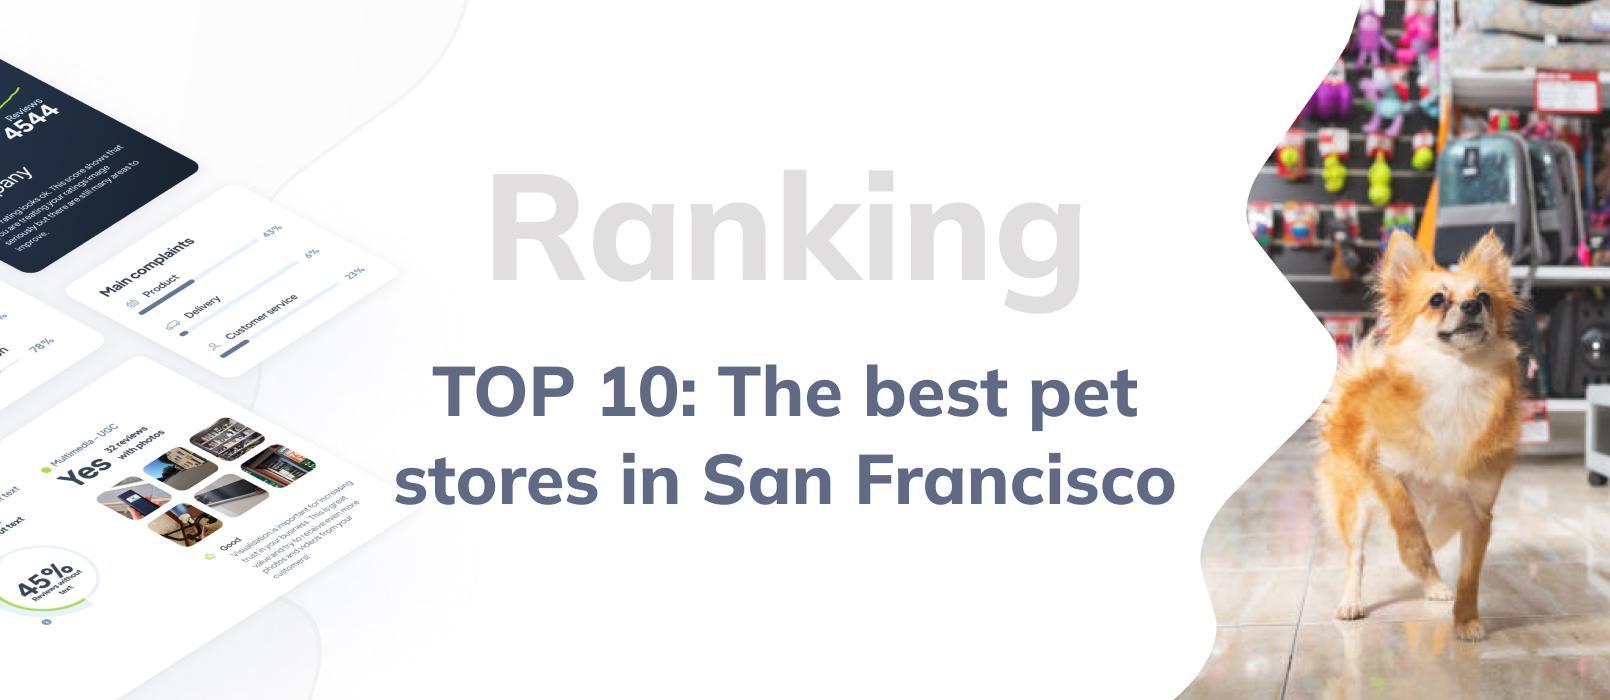 Pet stores in San Francisco - TOP 10 ranking